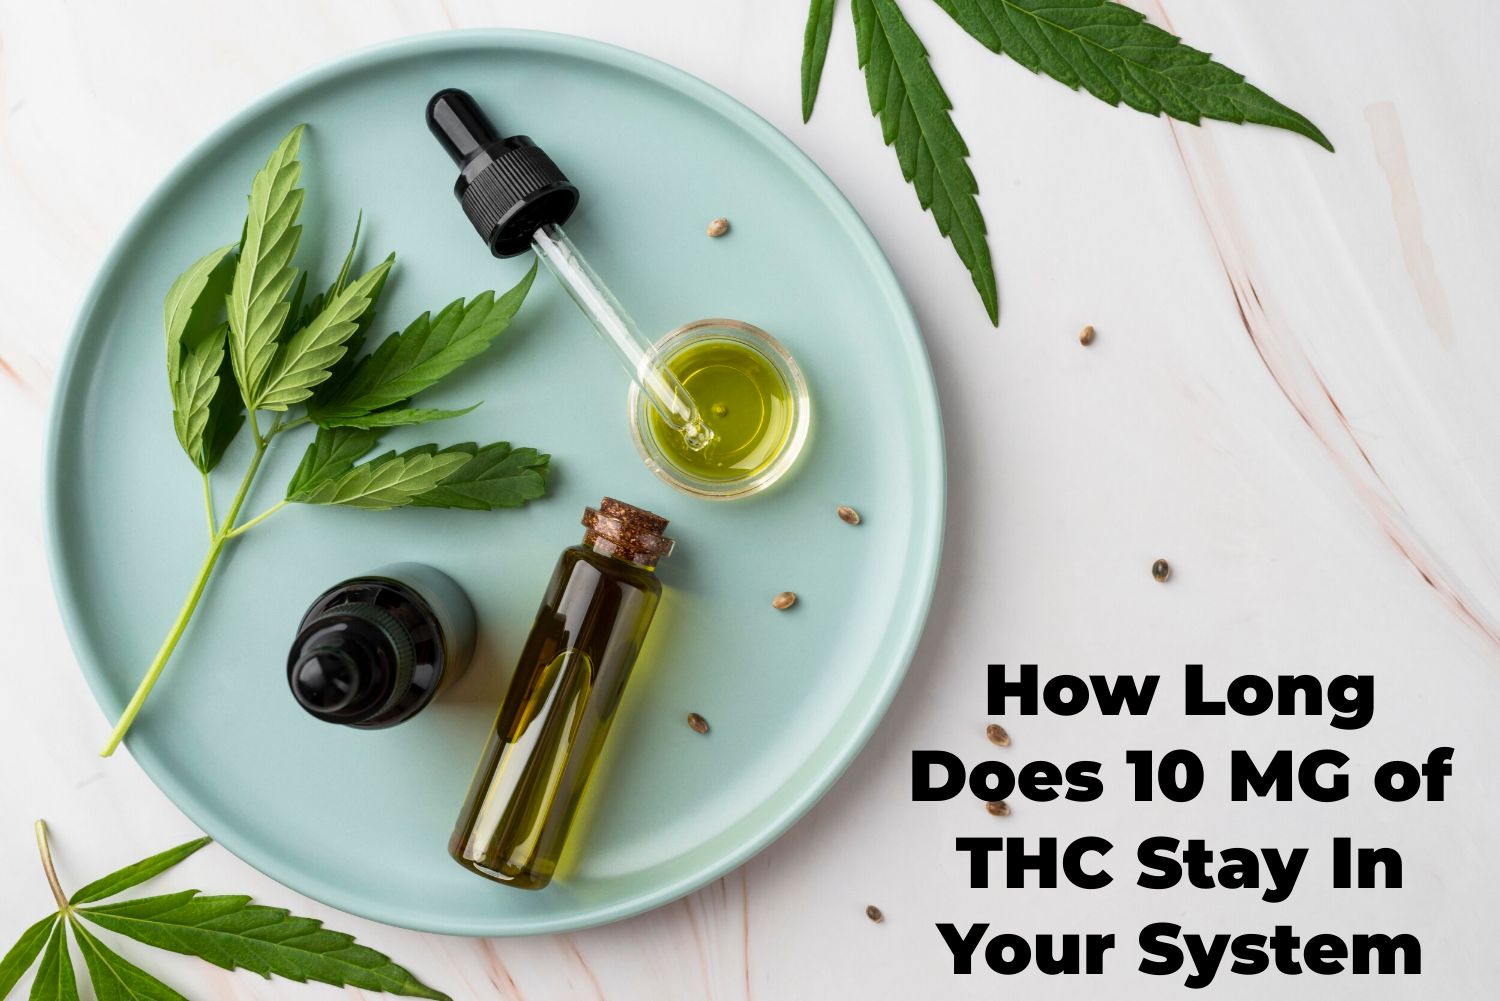 How Long Does 10 MG of THC Stay In Your System